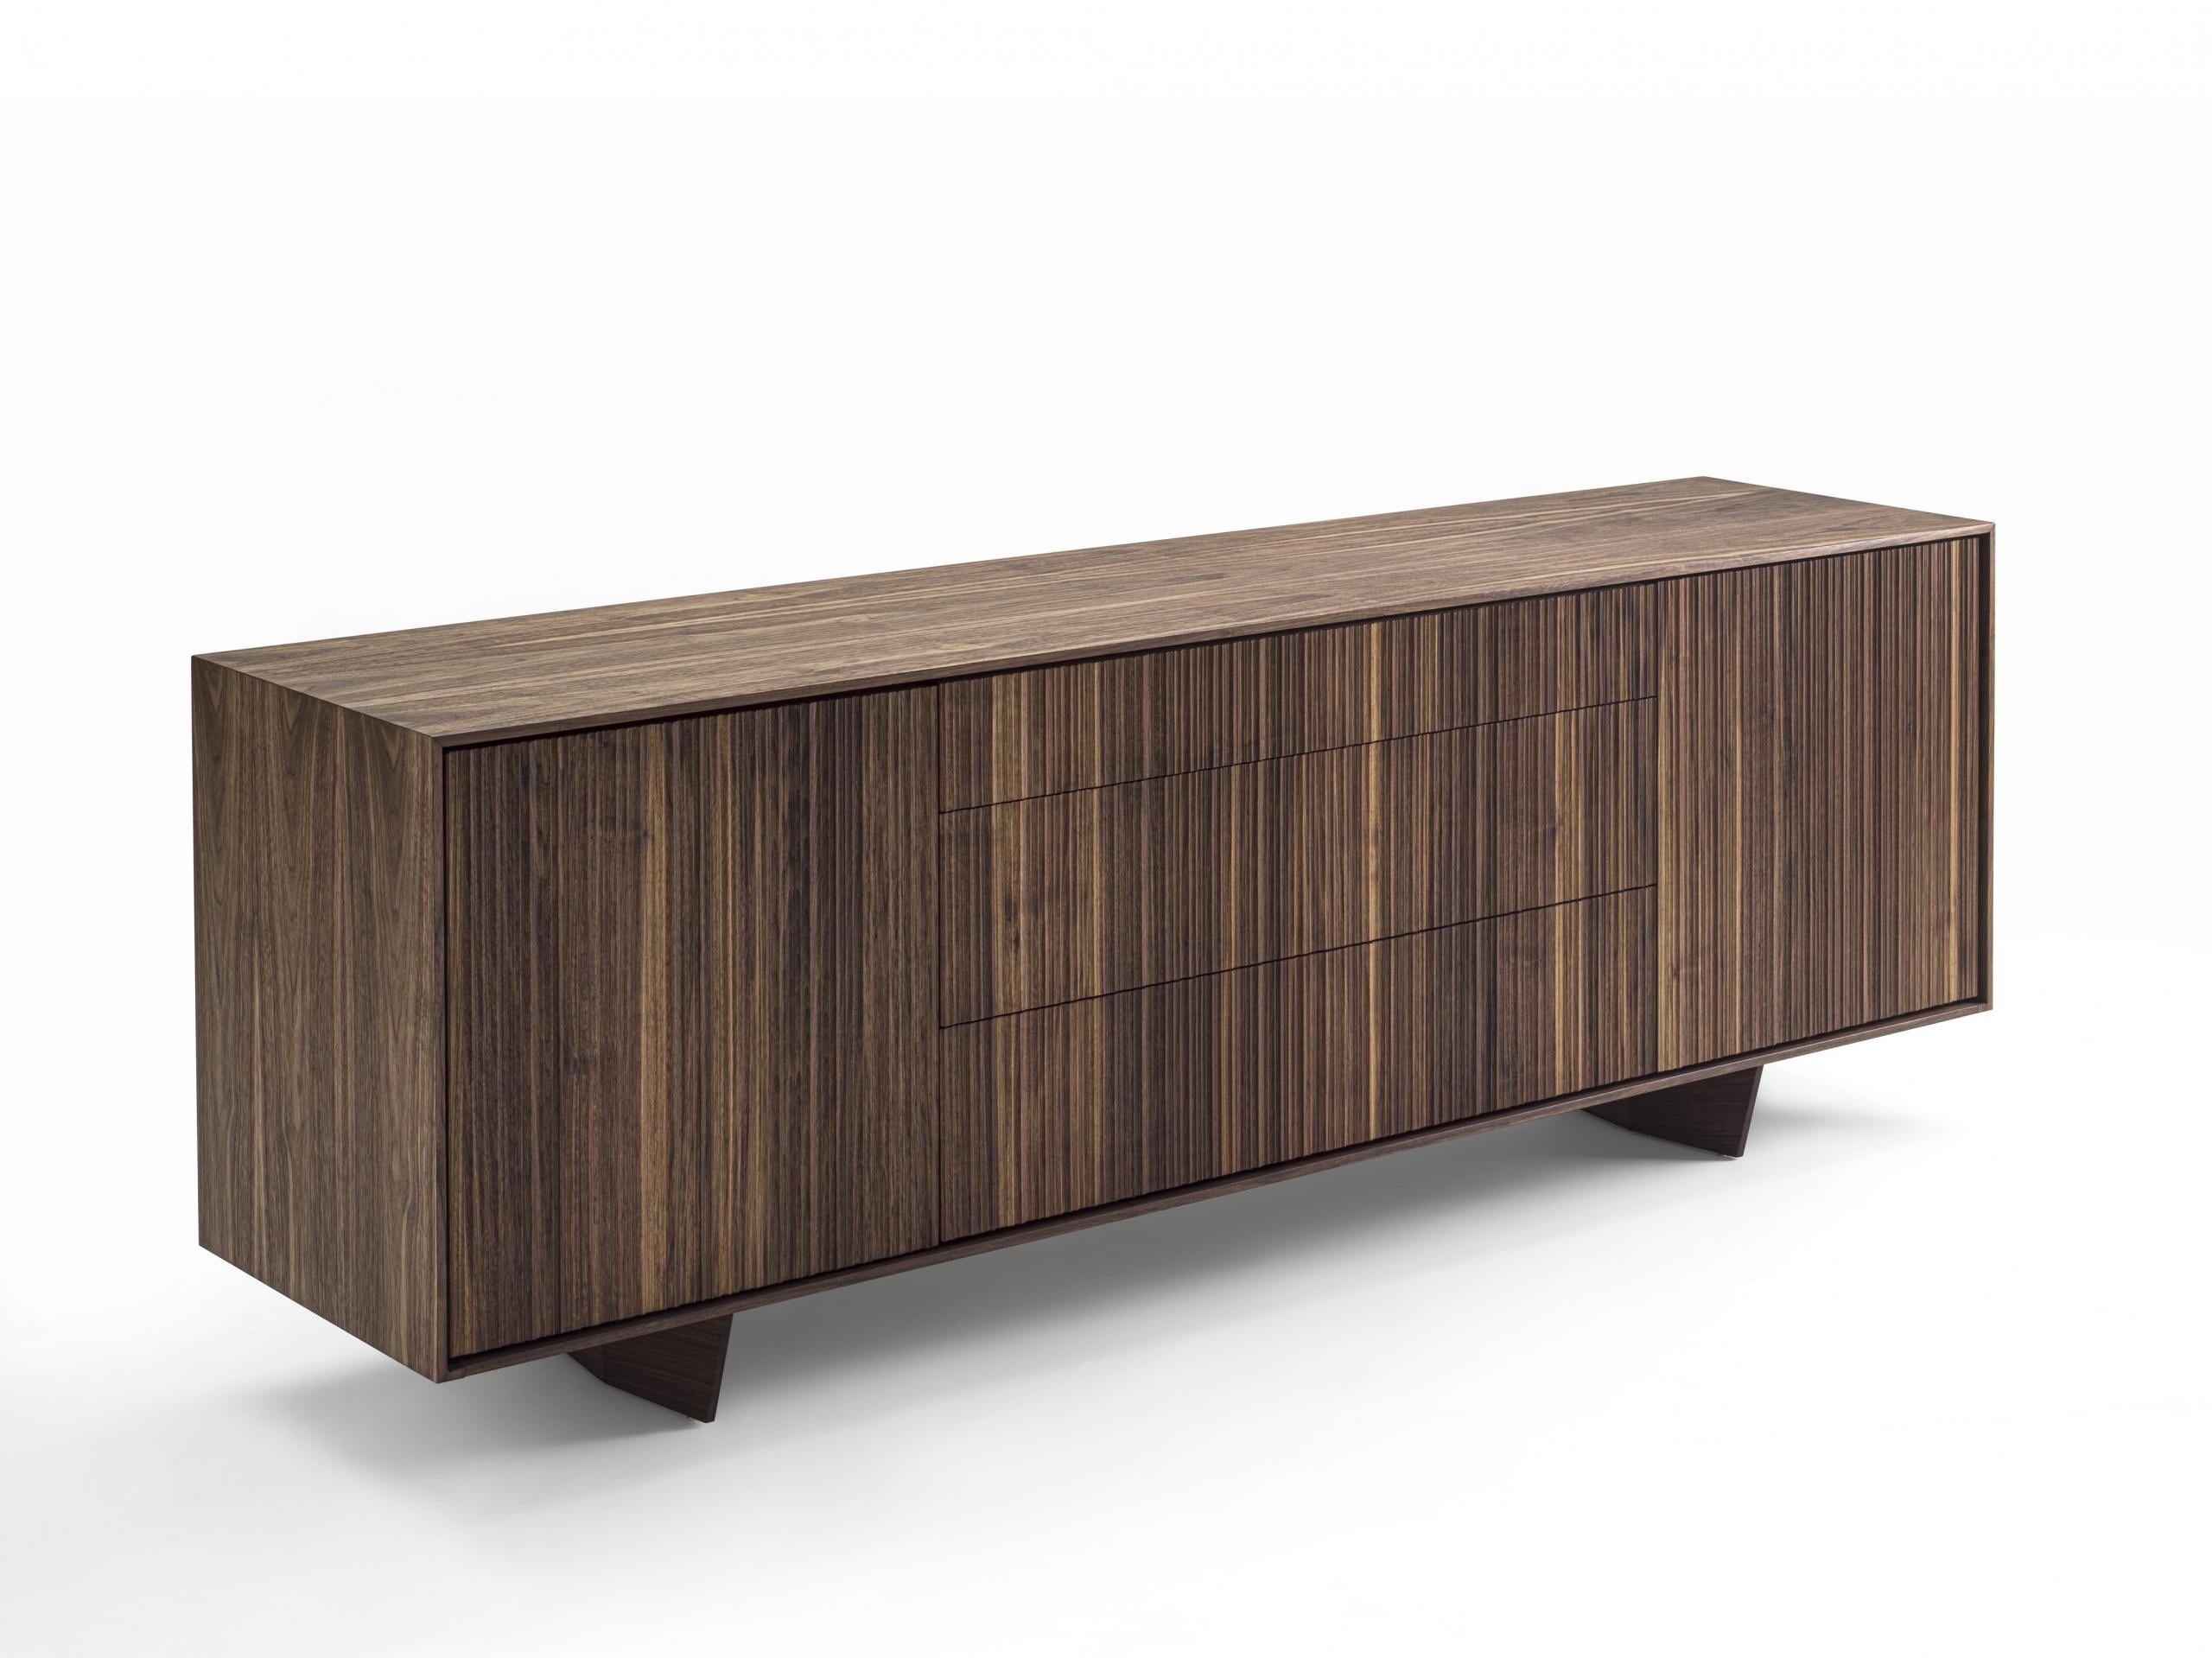 Sideboard made of solid wood and blockboard, characterized by a particular vertical processing of doors and drawer fronts that creates a modern and dynamic geometric effect. Drawers assembled with dovetail joints.

Available in Walnut, Cherry,